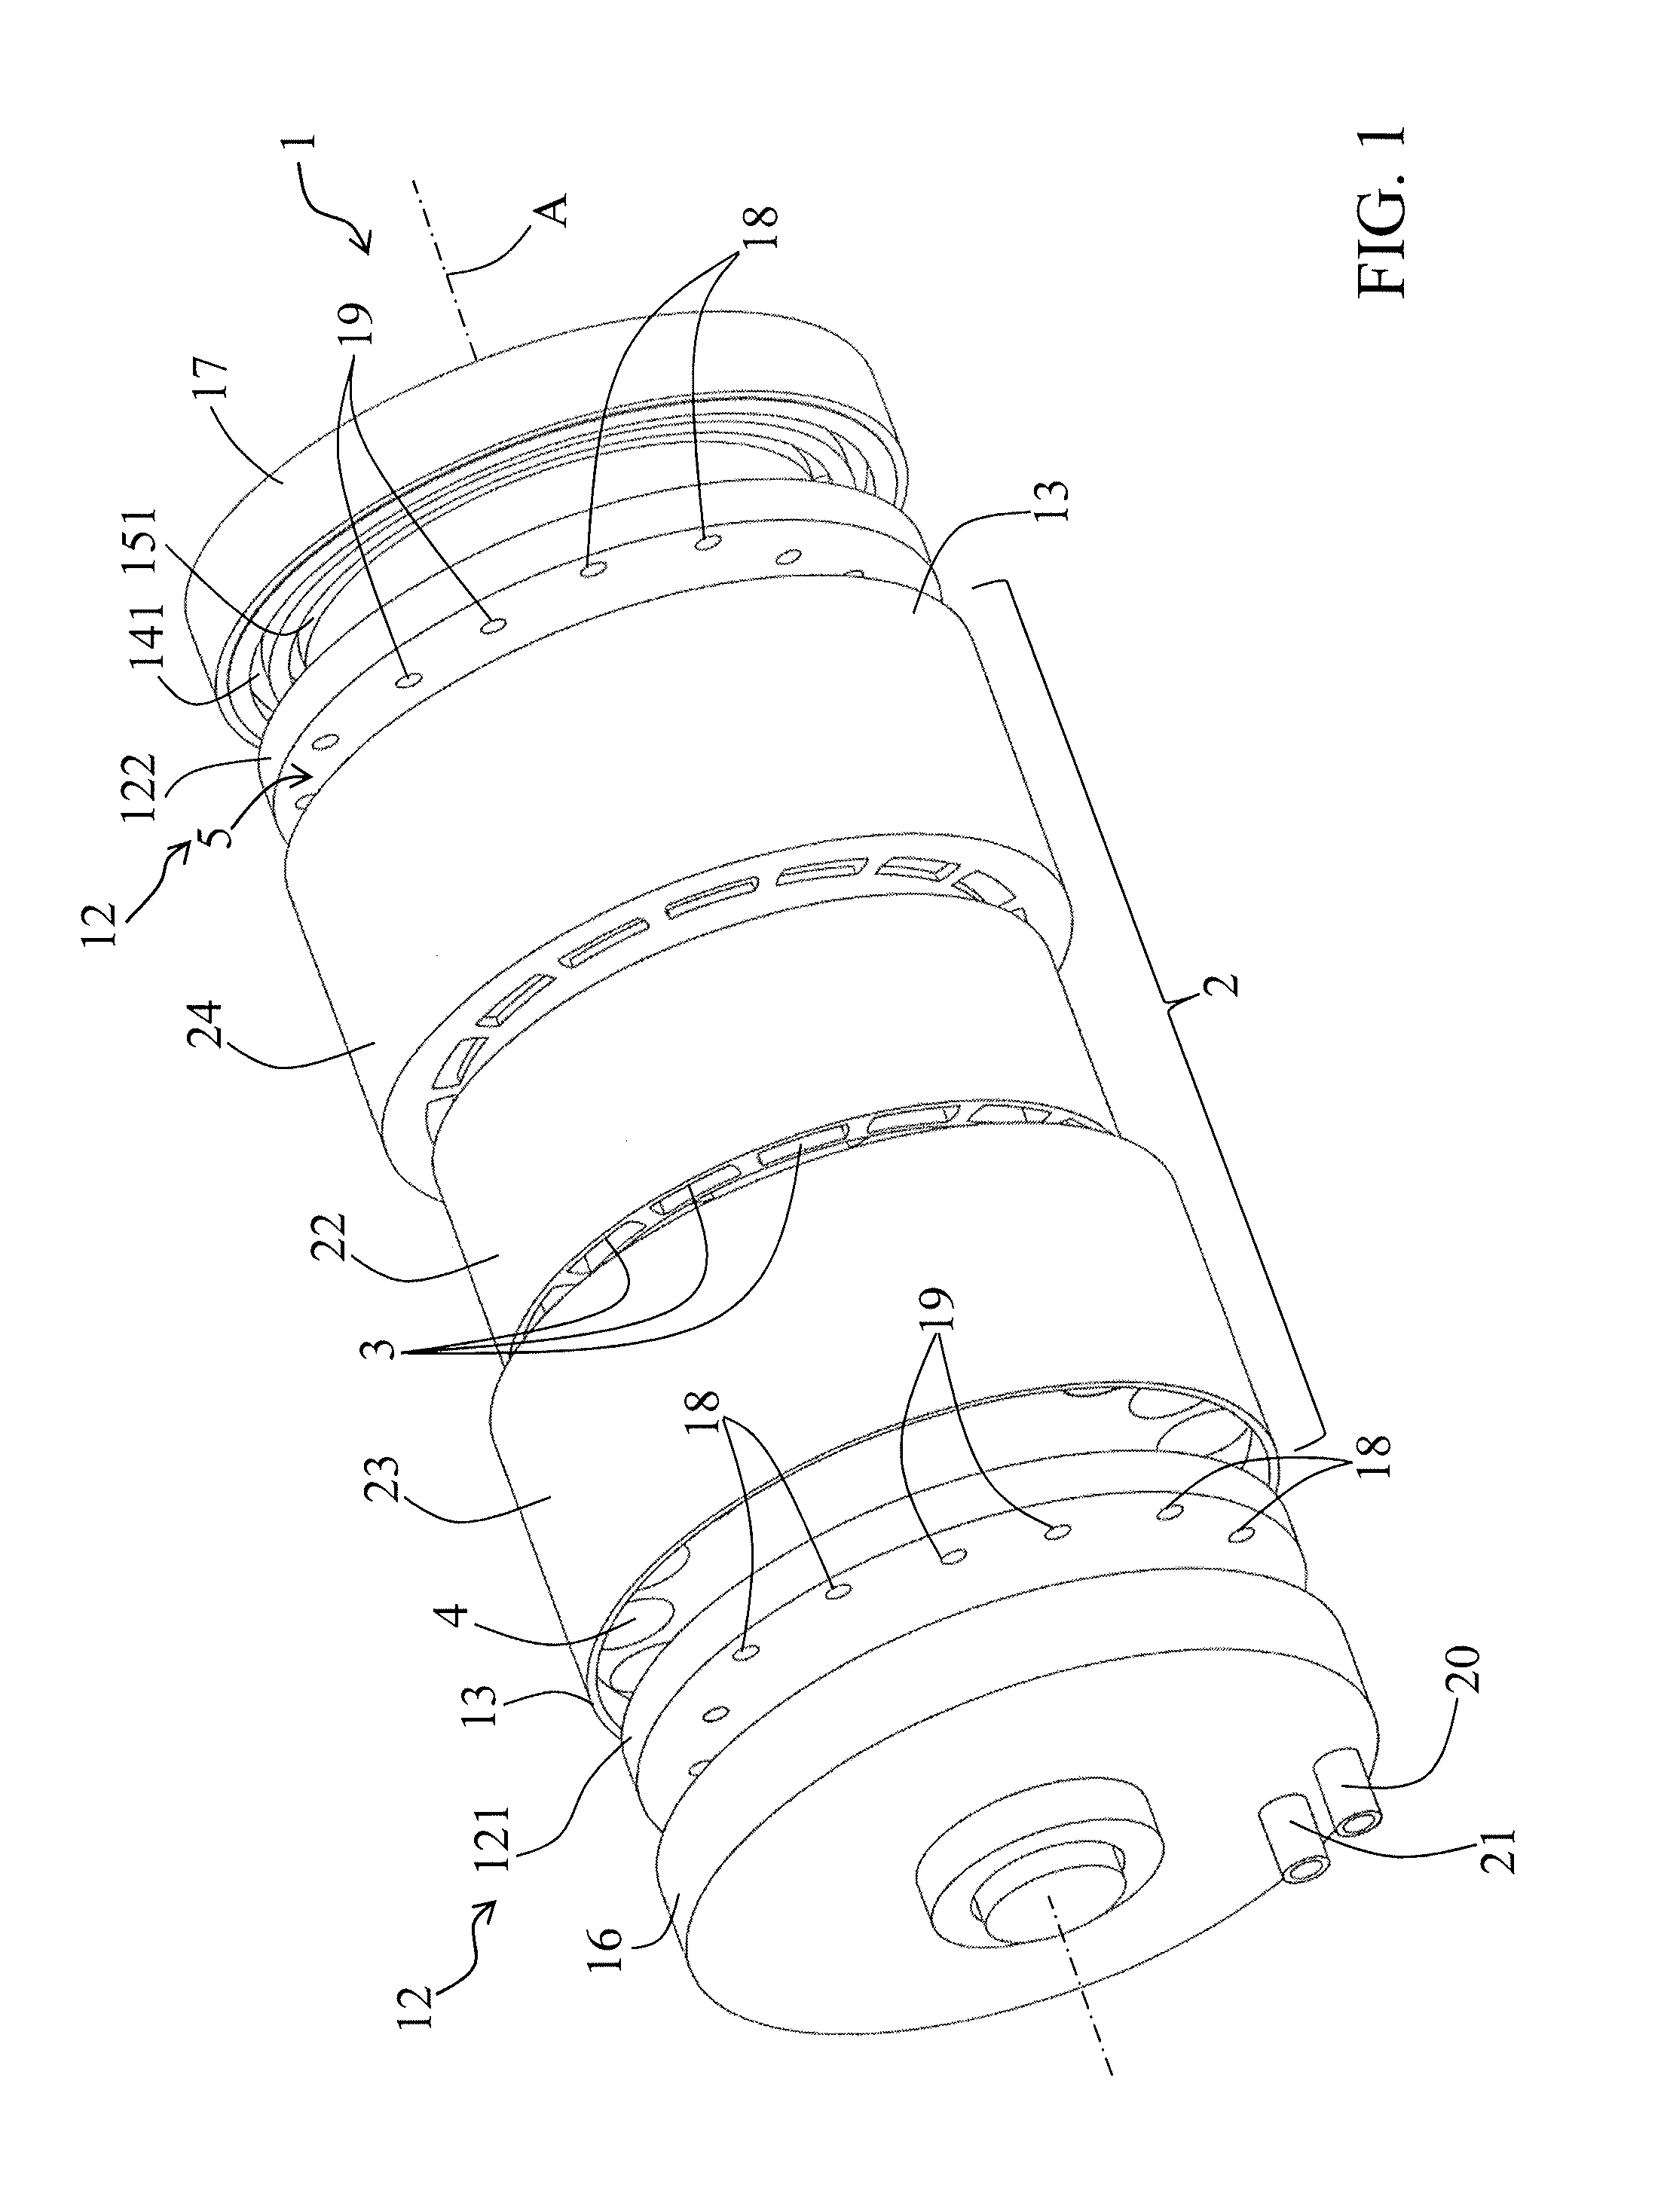 Thermal generator with magnetocaloric material